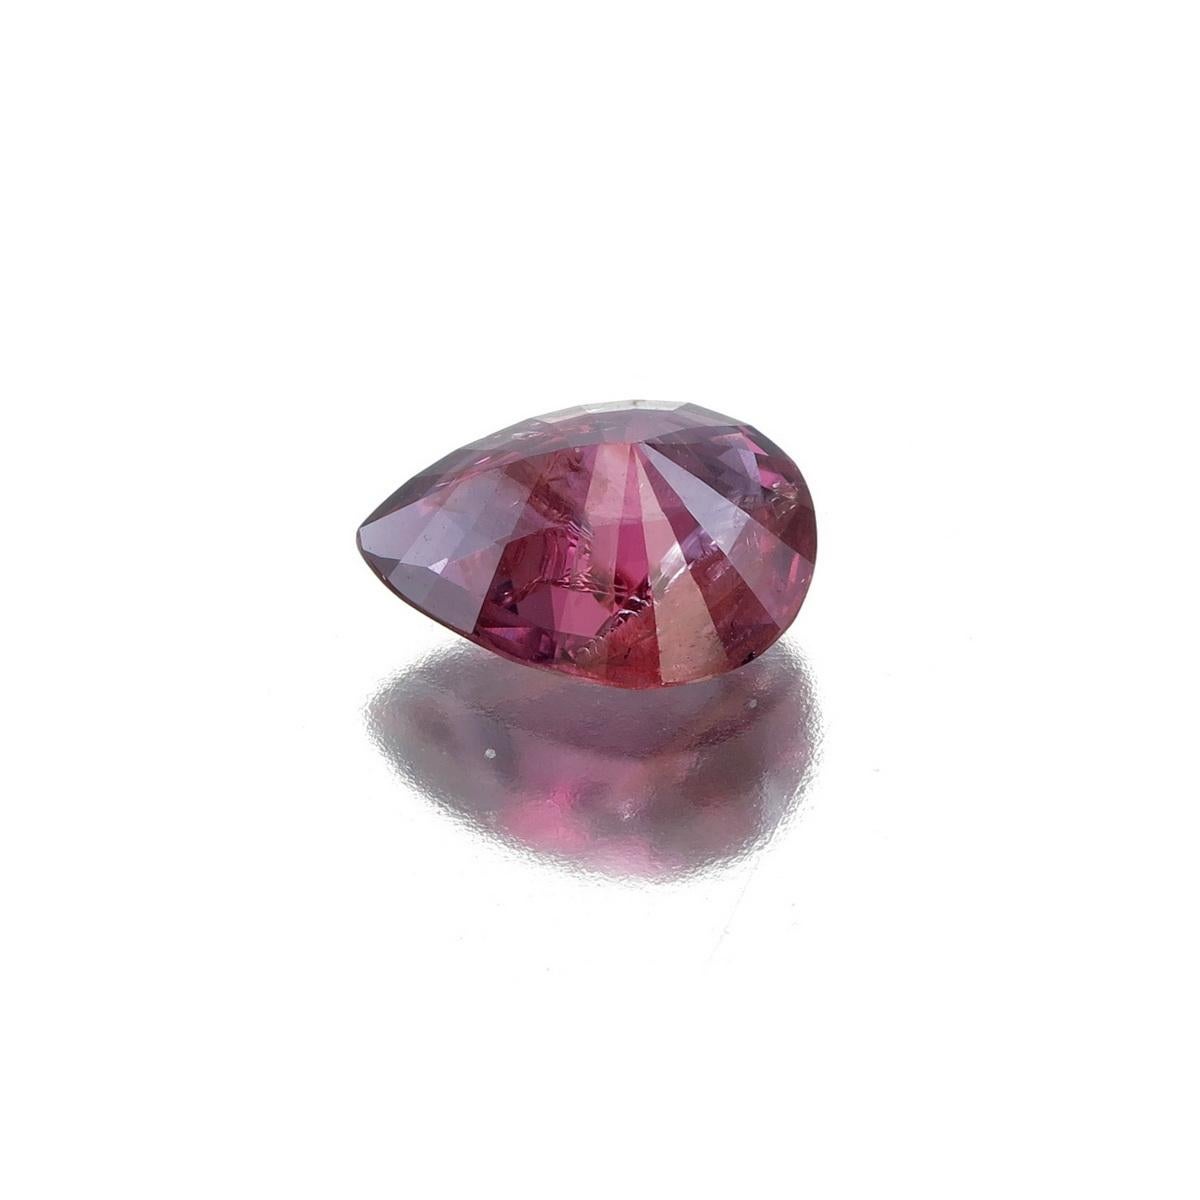 Women's 1.81 Carat Vivid Red Natural Spinel from Burma For Sale